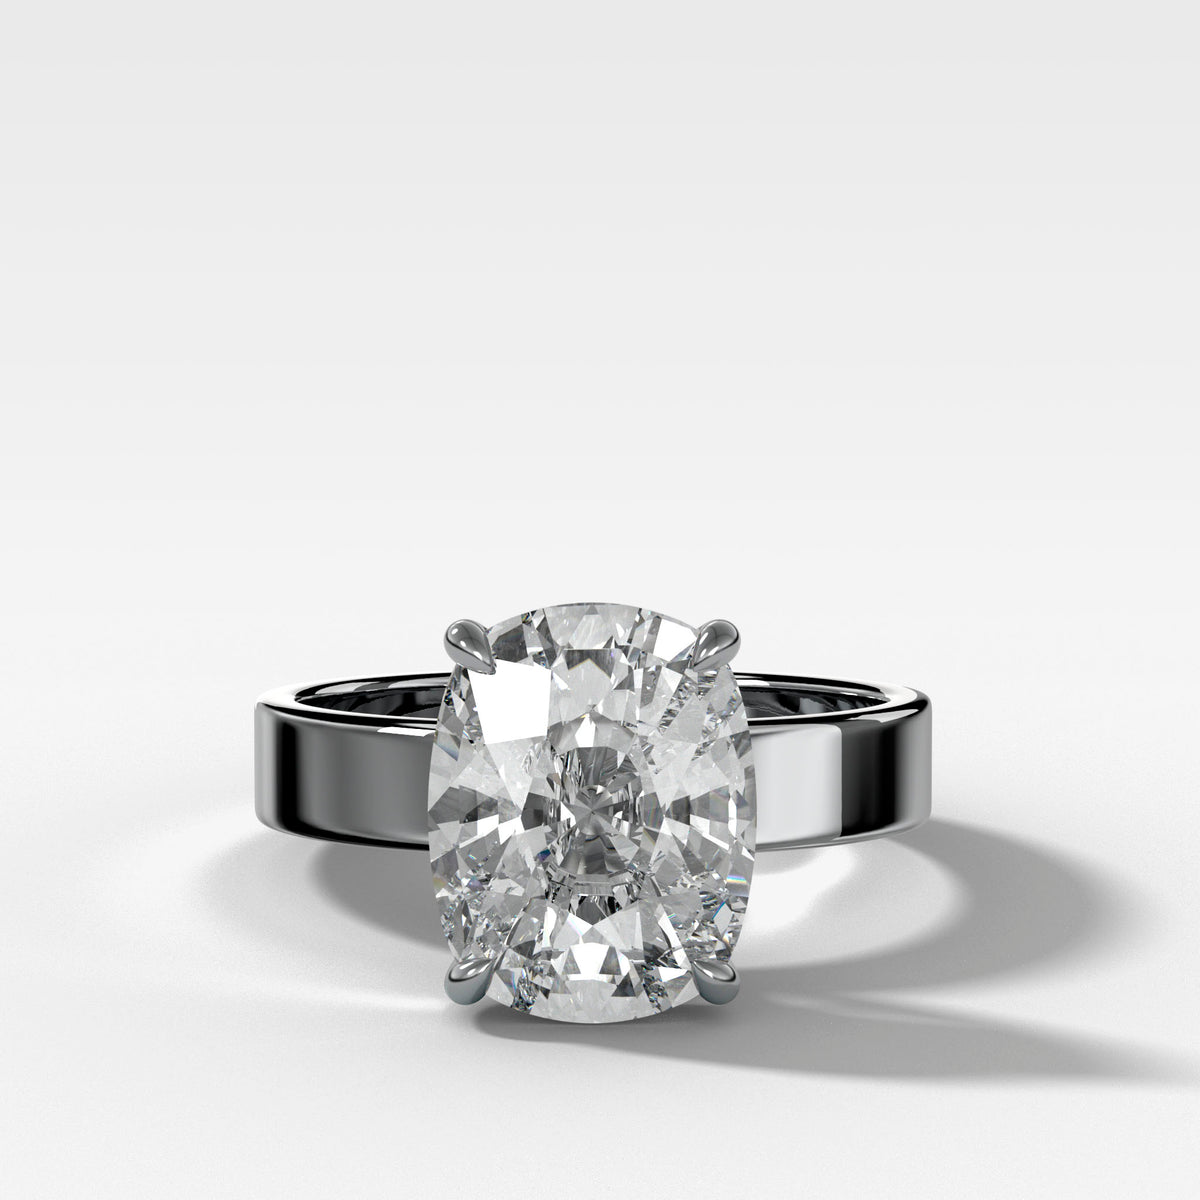 Finest Solitaire Engagement Ring With Elongated Cushion Cut Diamond